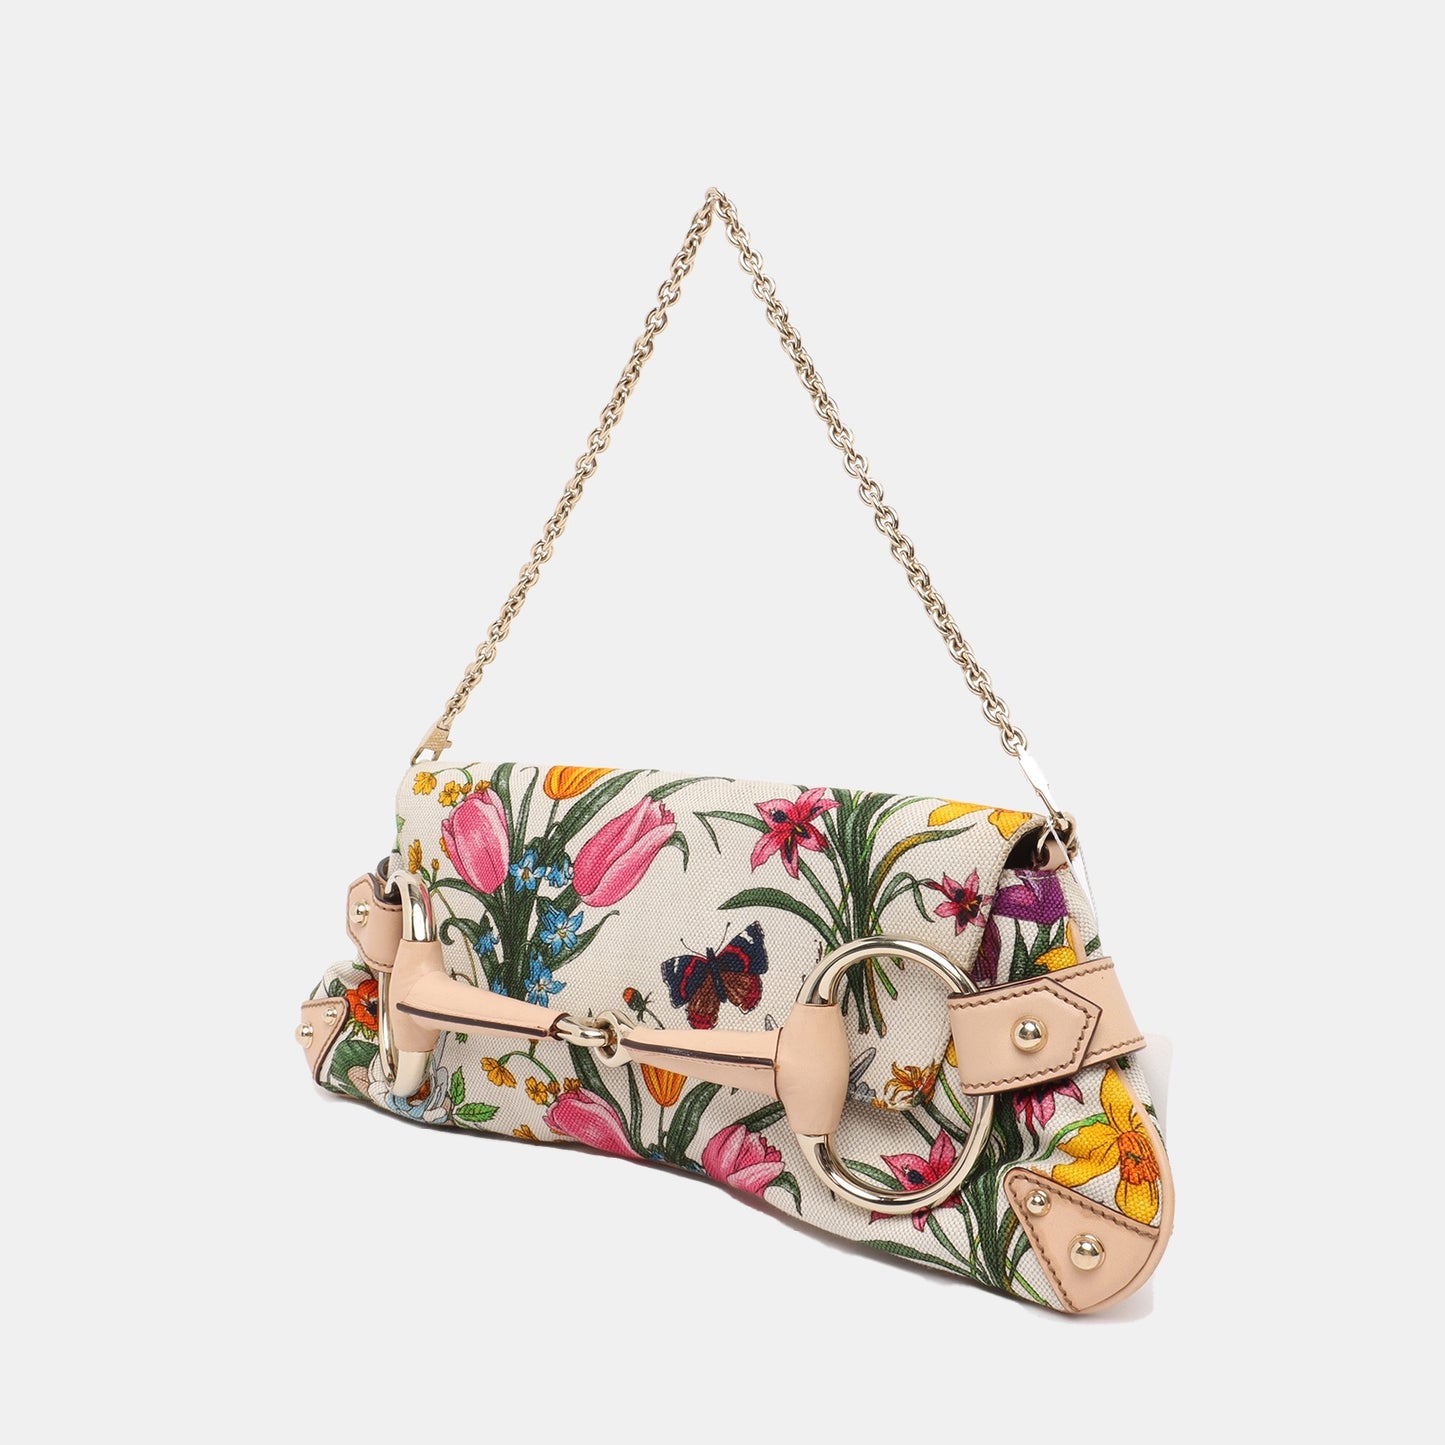 Gucci Horsebit 1955 Chain Shoulder bag in Limited edition floral print